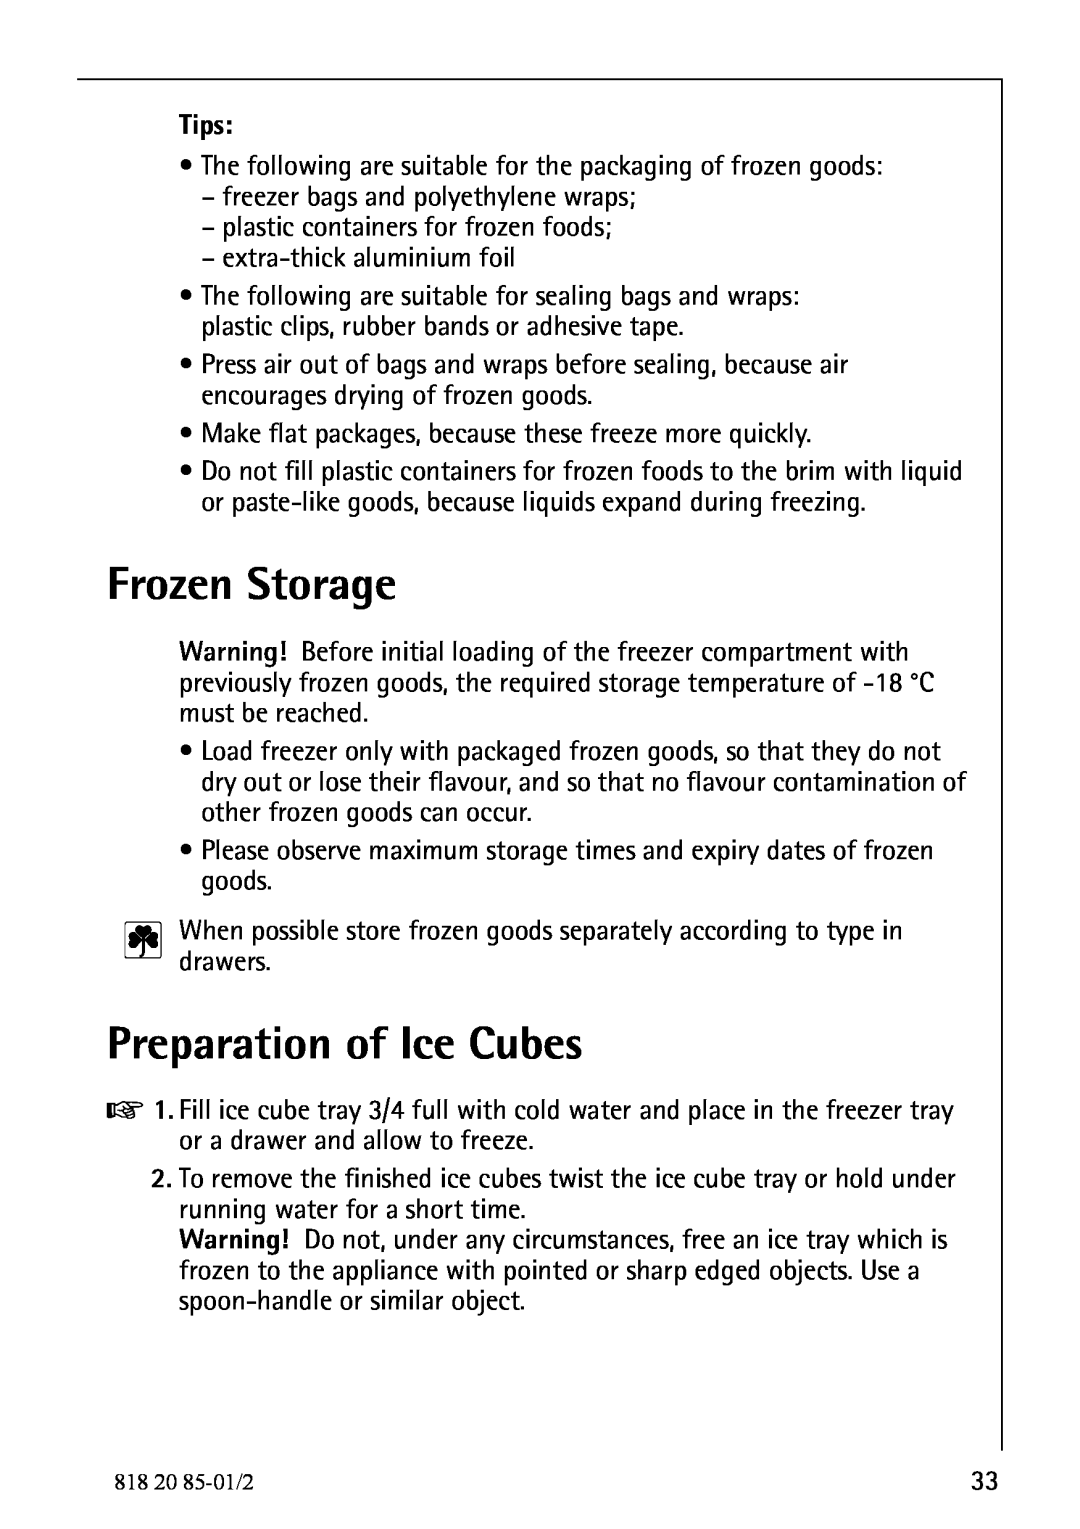 Electrolux 818 20 85 operating instructions Frozen Storage, Preparation of Ice Cubes, Tips 